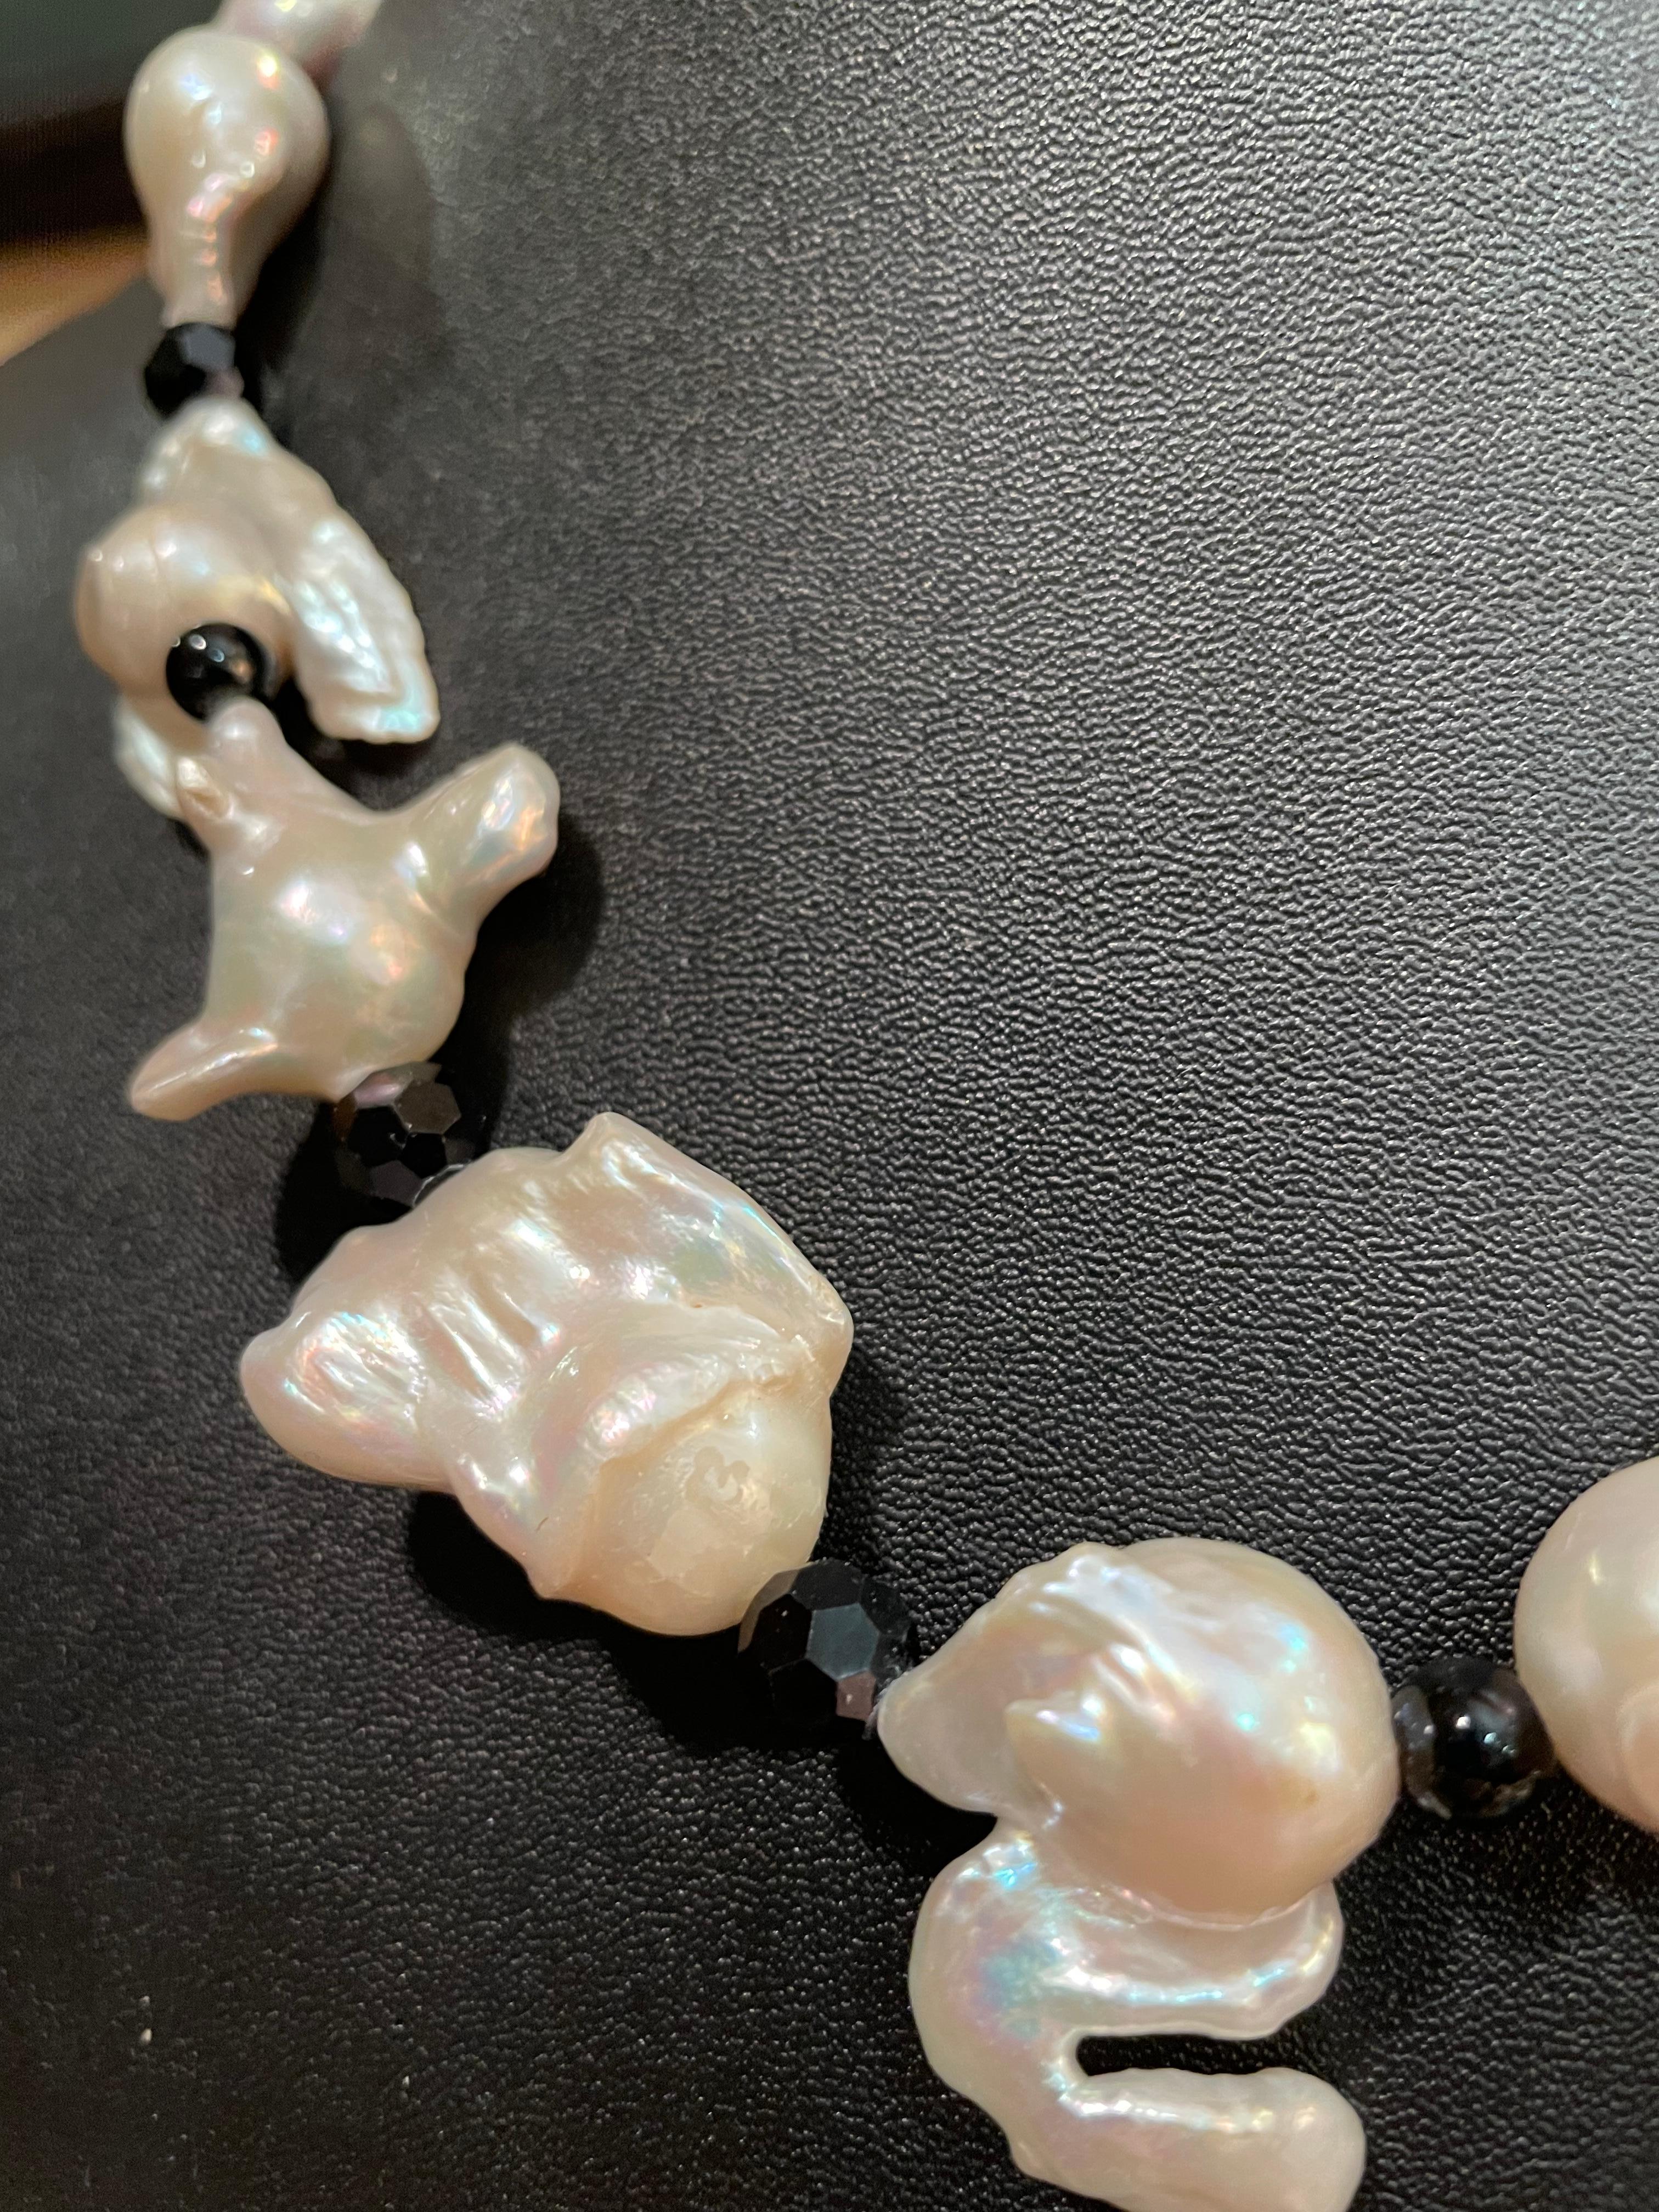 Lorraine’s Bijoux has on offer a Large White Baroque Pearl and vintage black crystal, handmade, one of a king necklace.
These pearls are wonderfully asymmetrical and make a strong but refined statement.
The vintage crystals are faceted Czech crystal